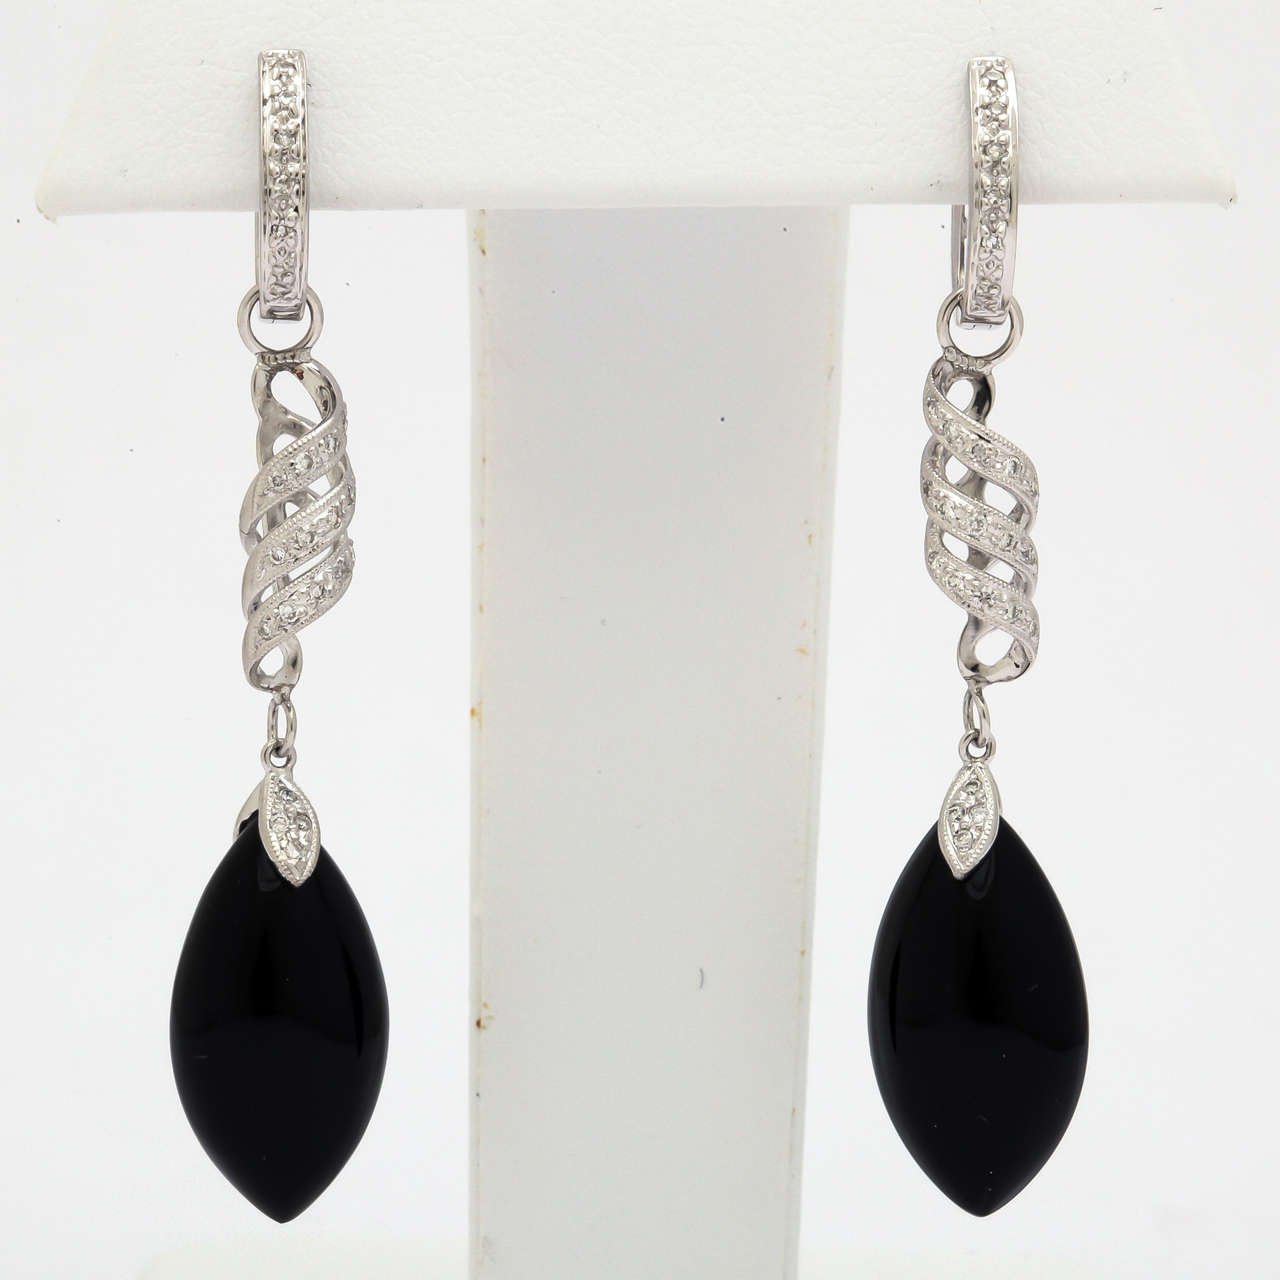 These beautiful dangling earrings can convert to simple huggies. The diamond swirl and black onyx drop can easily be removed and replaced. Other earring charms can be custom made and added to match a particular outfit. These earrings are made of 18